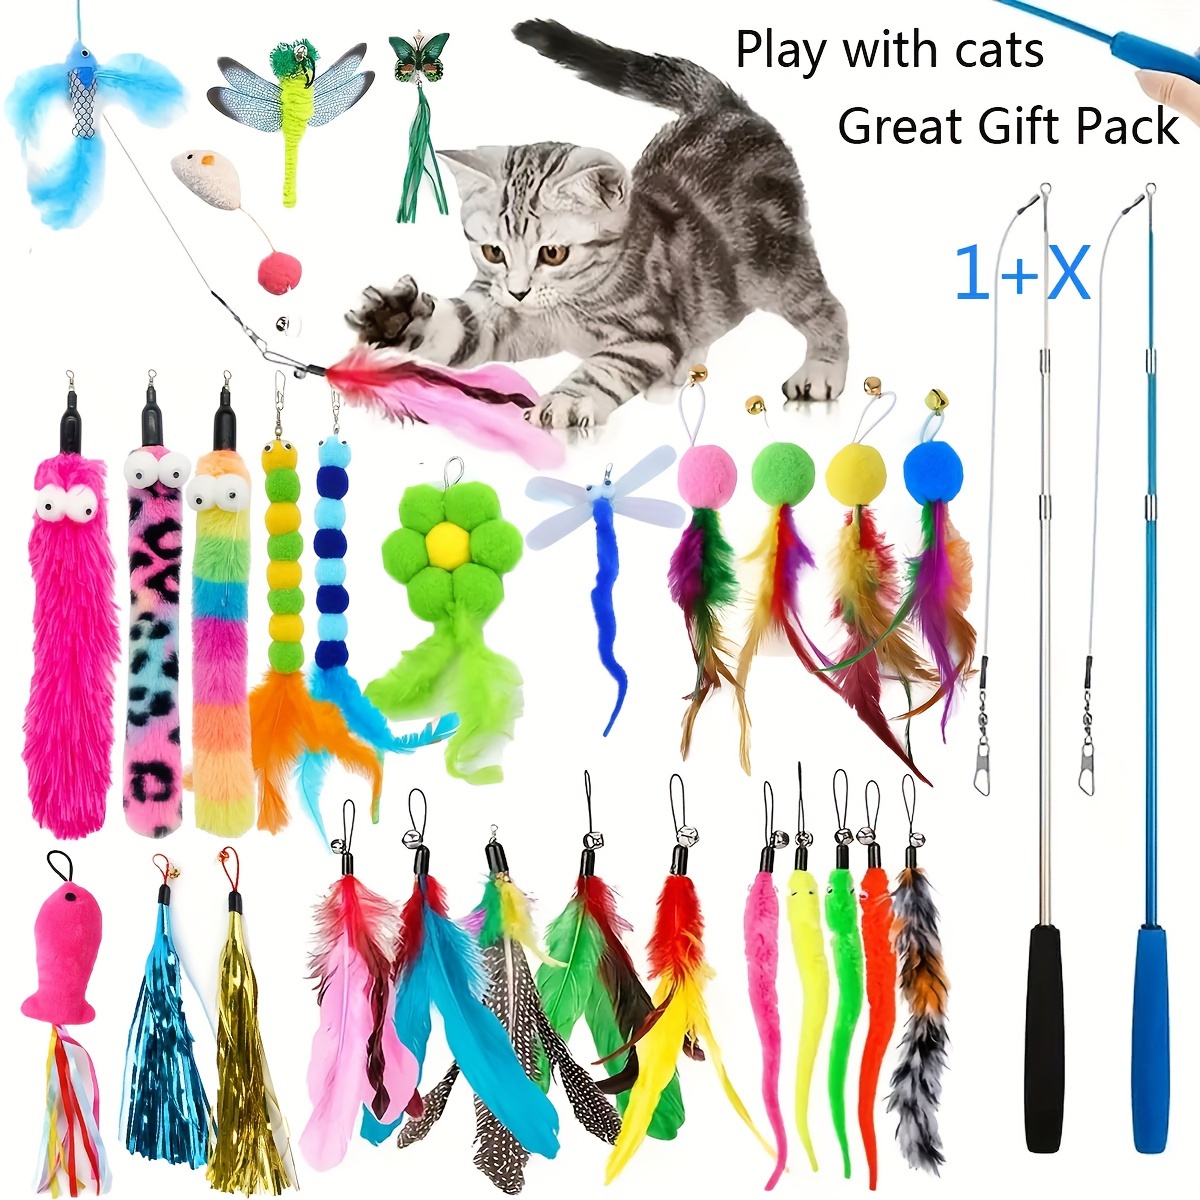 Rope Launcher, Cat Teaser Toy, Teaser Toy, New Strange Toy - Toys